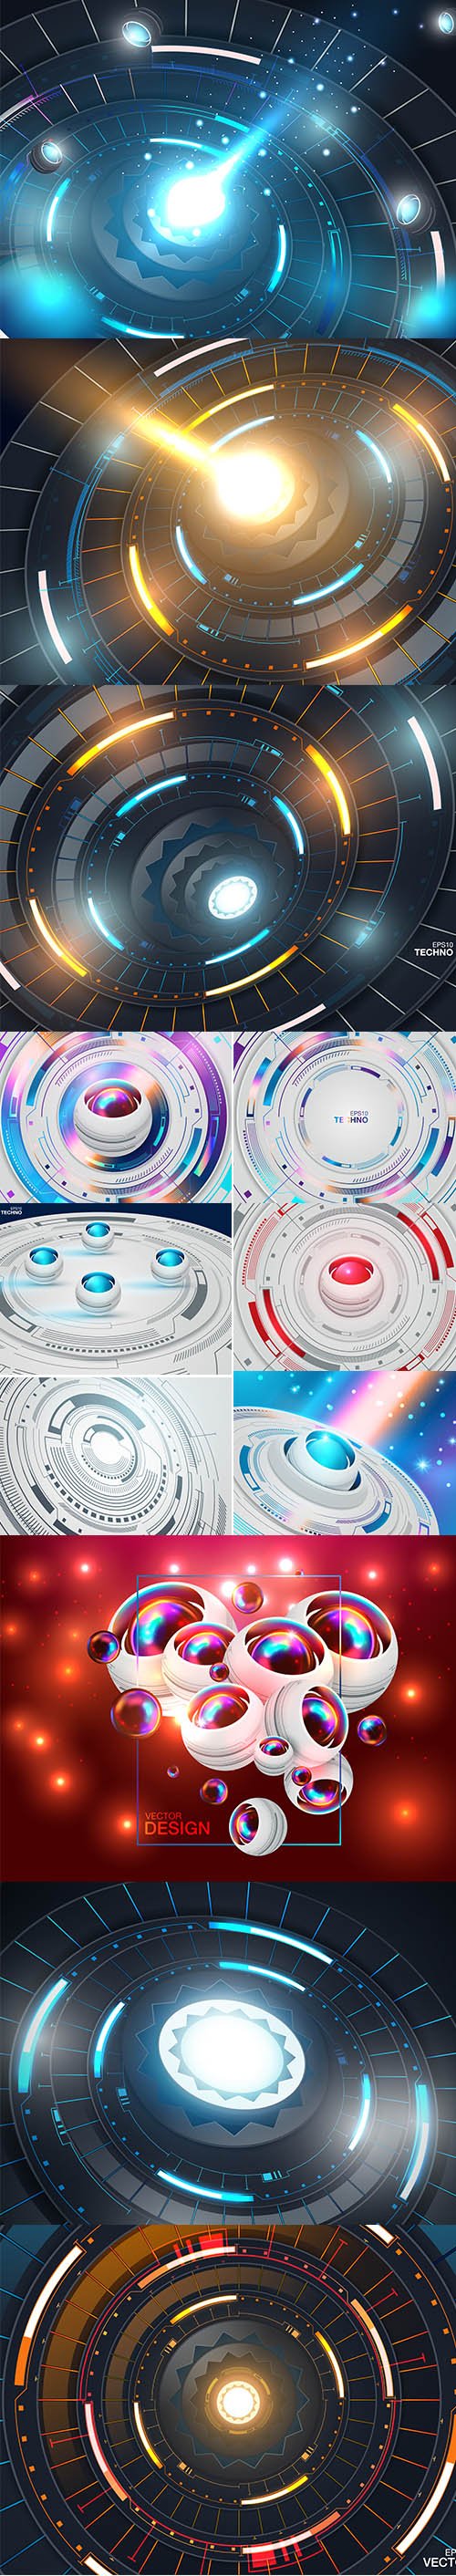 Futuristic Abstract High Computer Technology Illustrations Pack